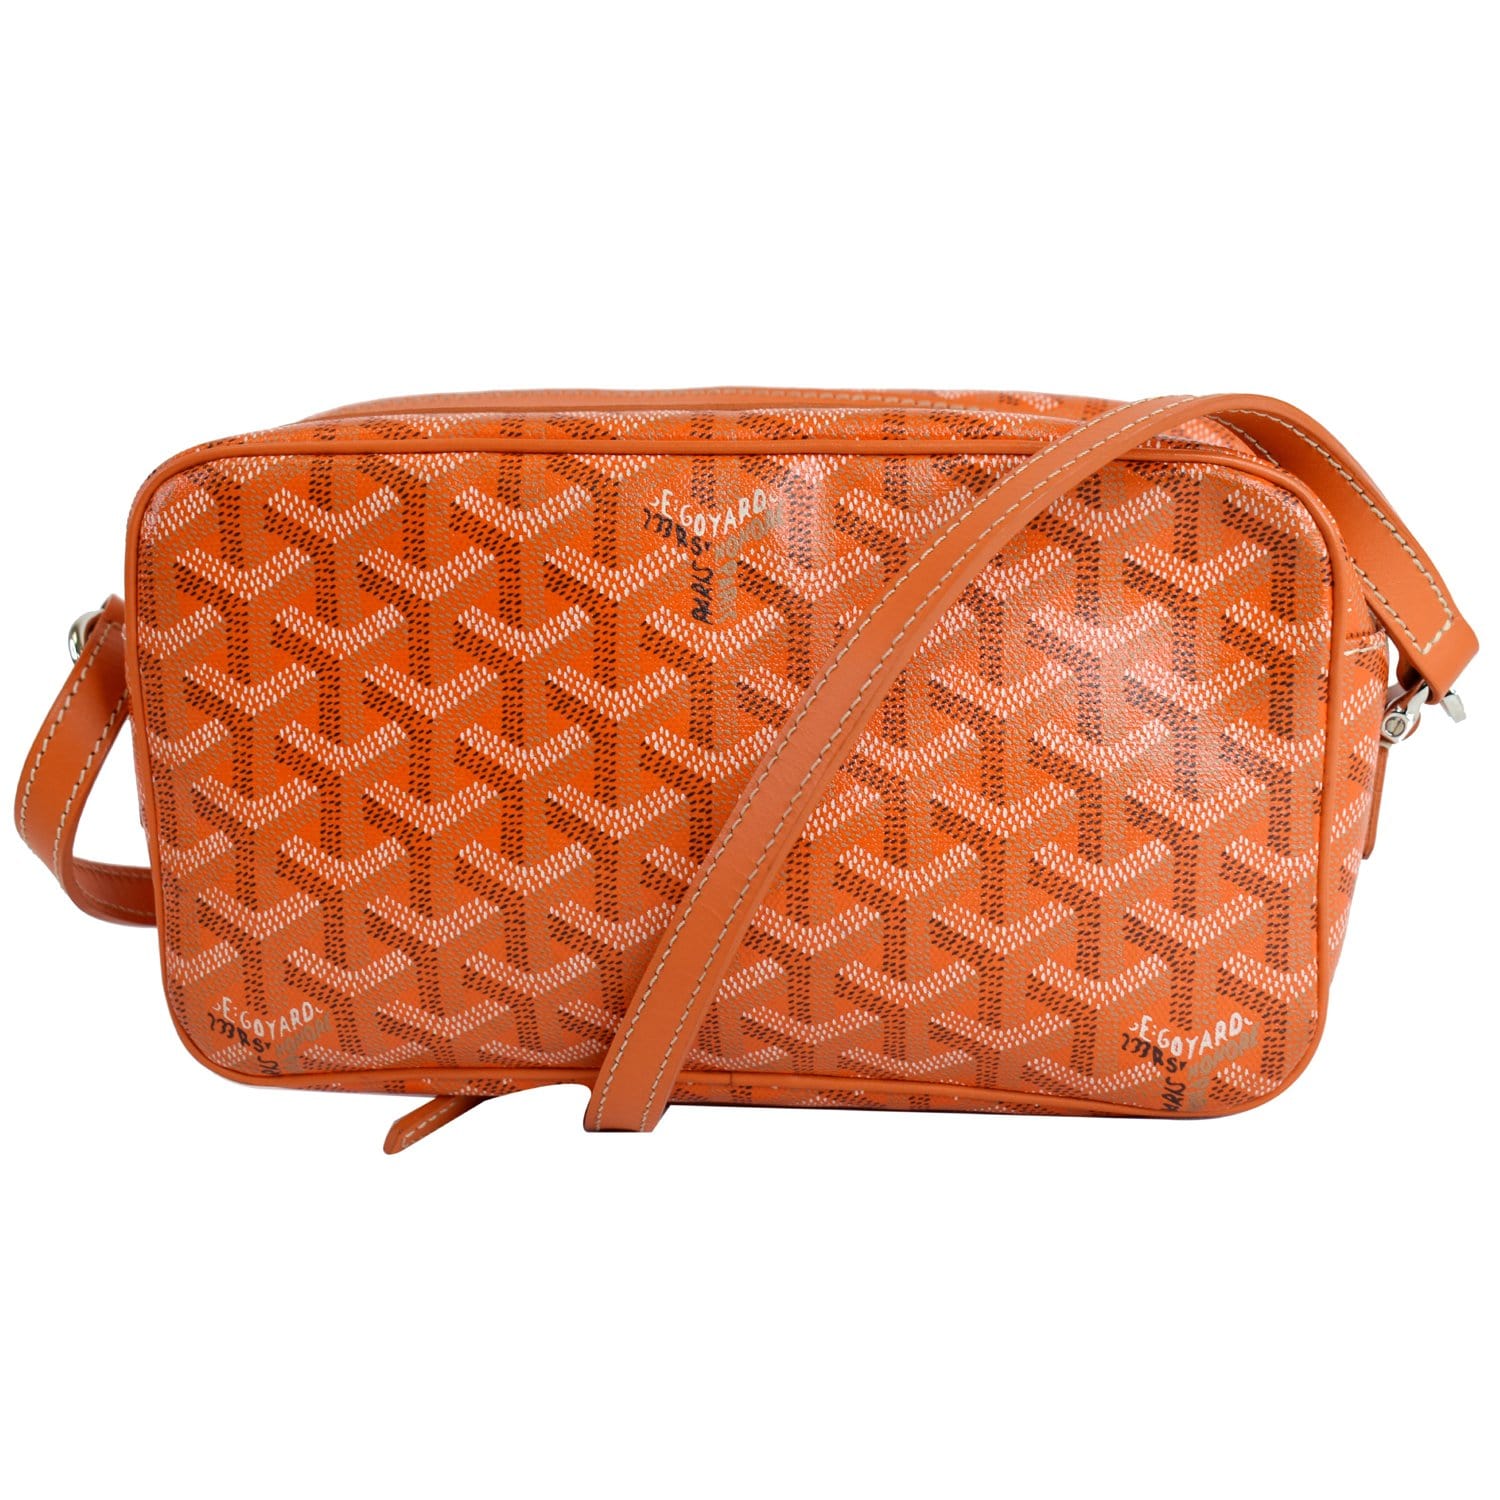 Goyard Cap Vert crossbody bag This item is not available on the